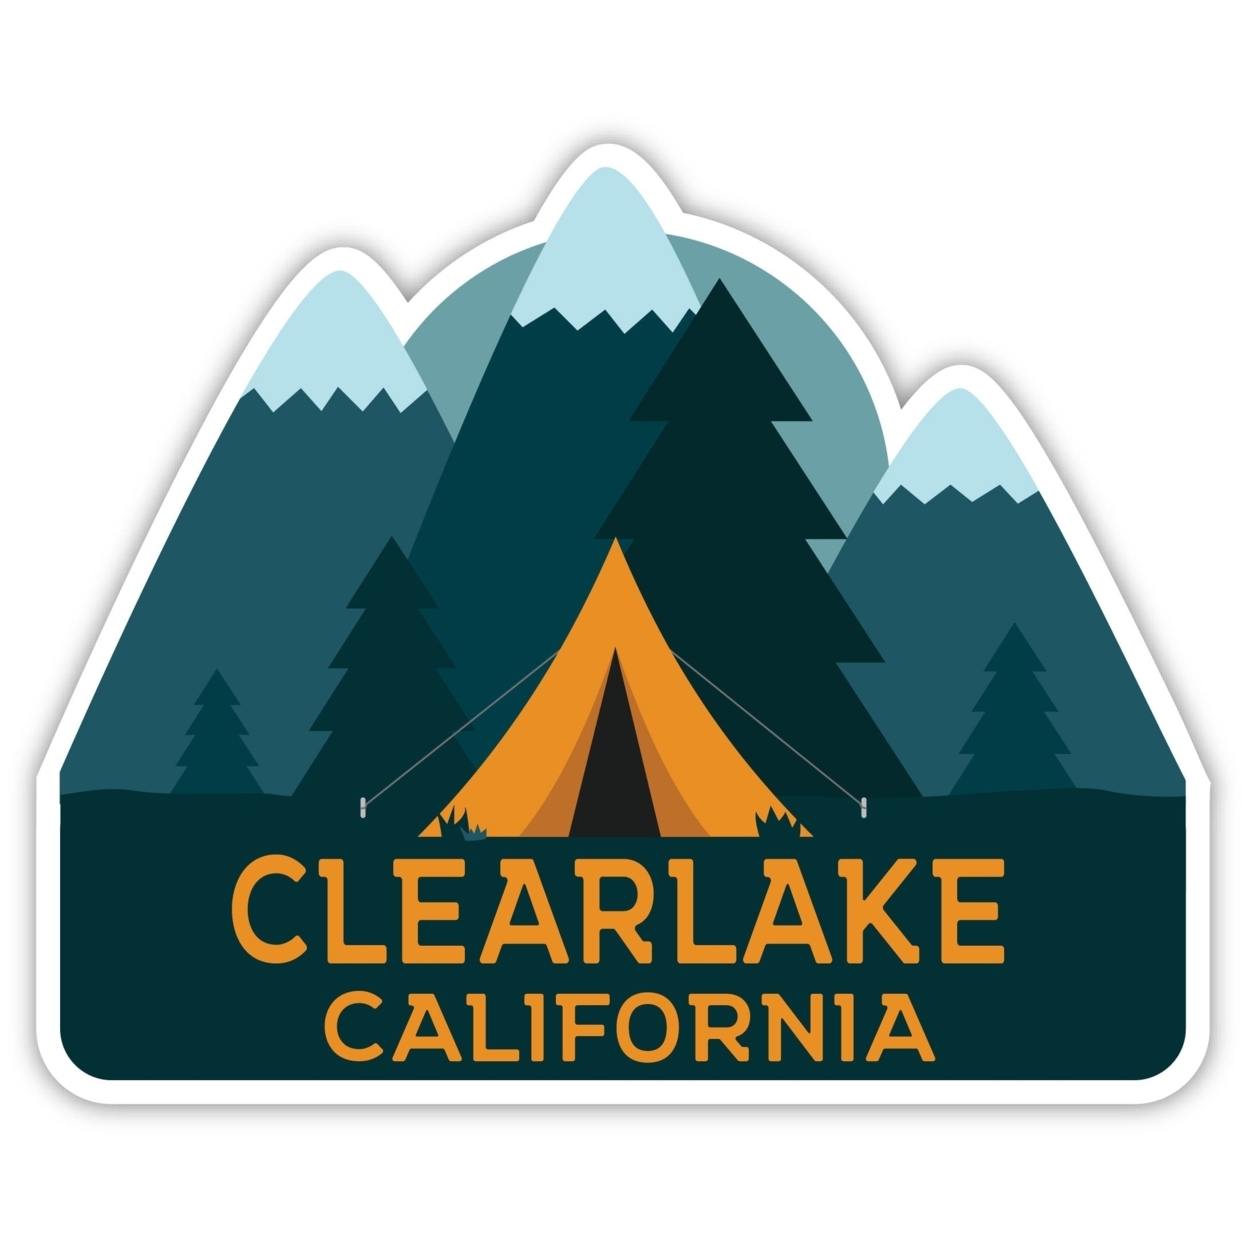 Clearlake California Souvenir Decorative Stickers (Choose Theme And Size) - 4-Pack, 2-Inch, Bear